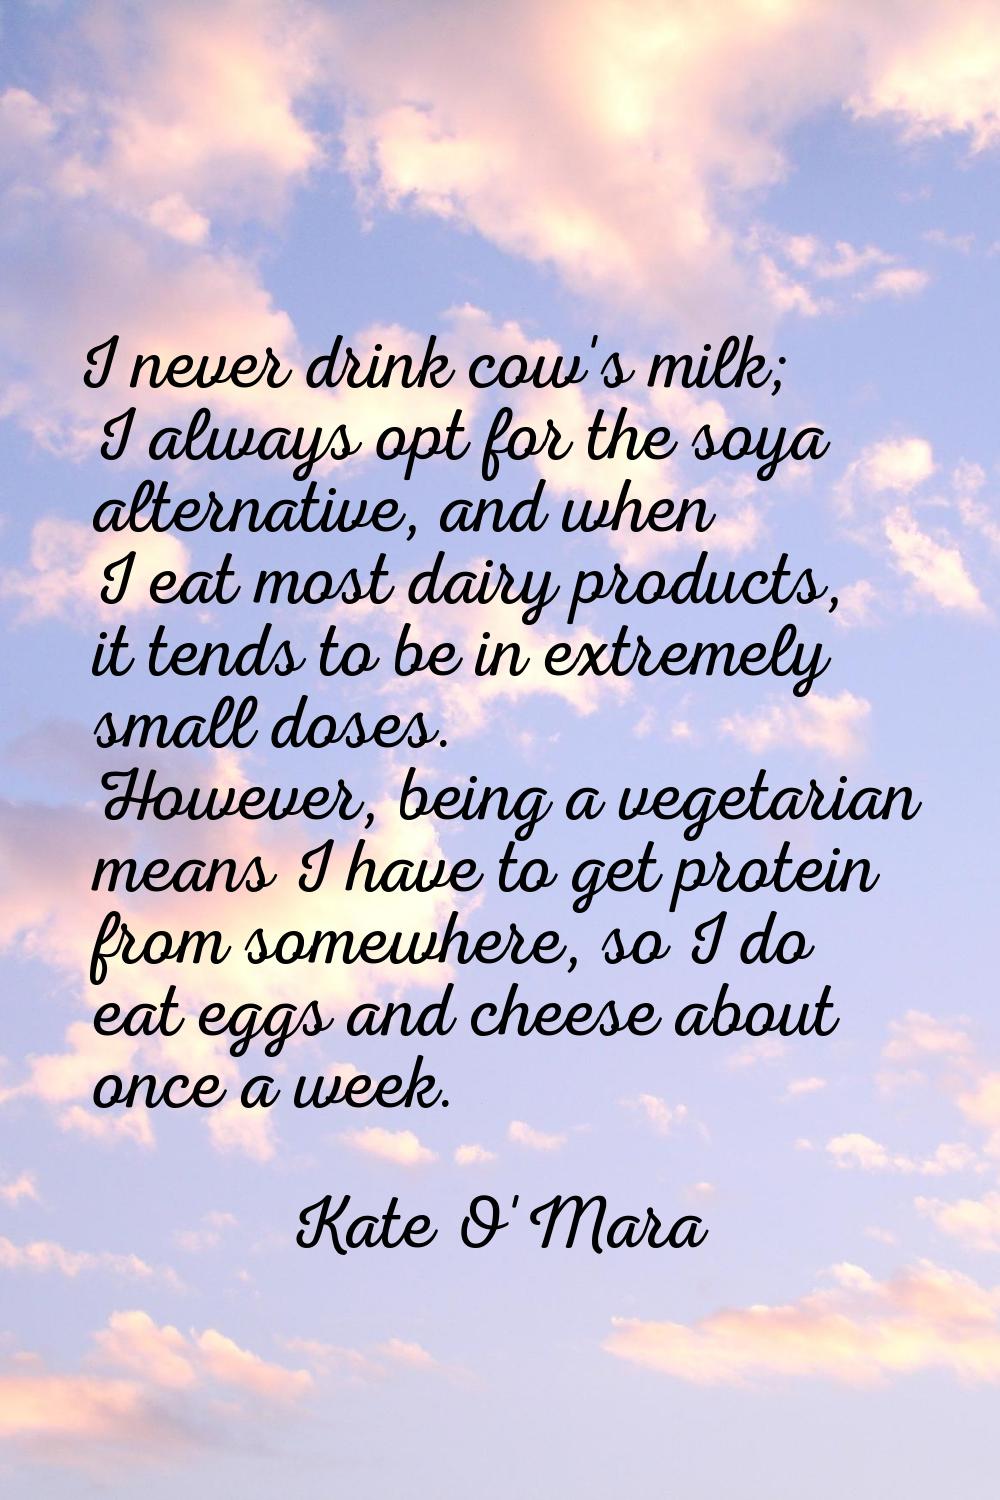 I never drink cow's milk; I always opt for the soya alternative, and when I eat most dairy products